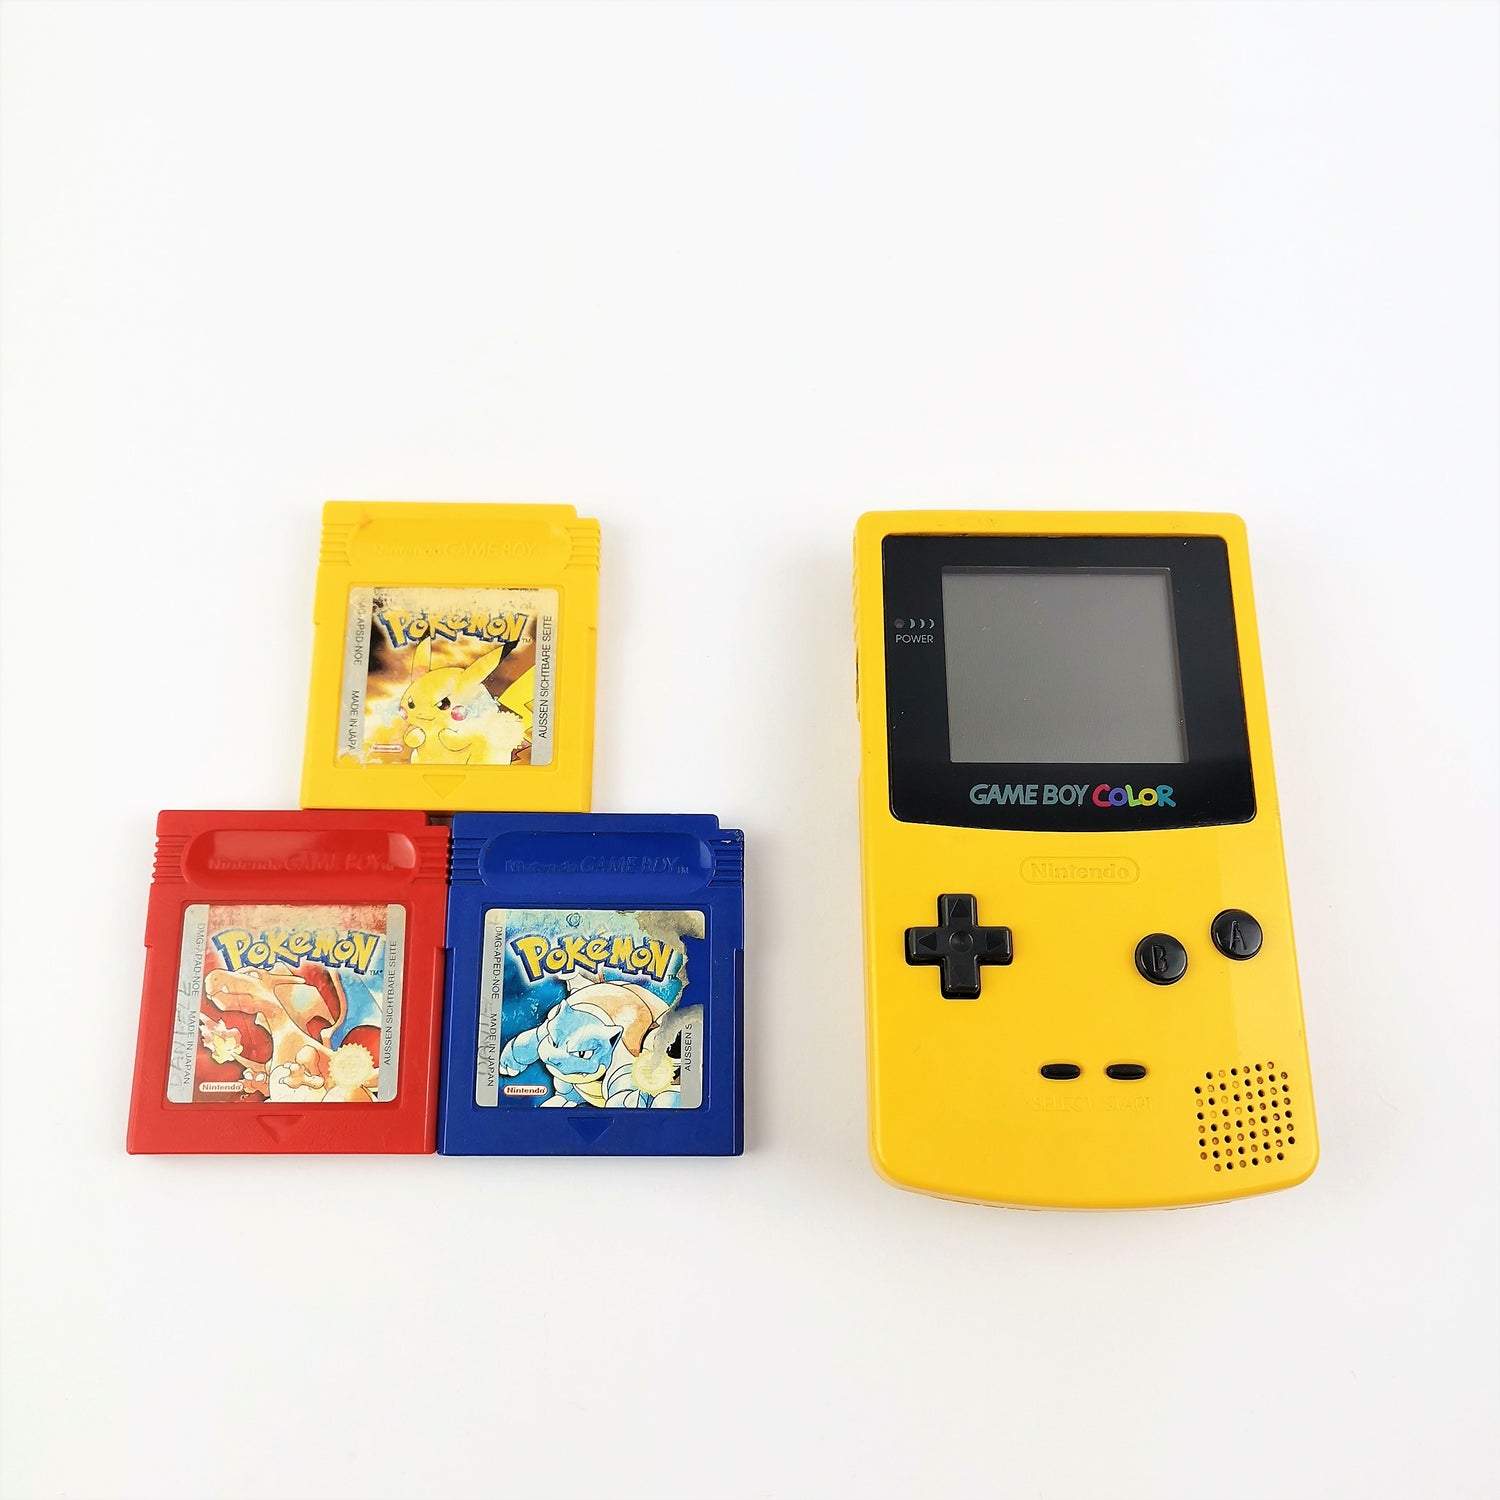 Nintendo Game Boy Color Console in Yellow + Pokemon Red - Blue - Yellow Edition